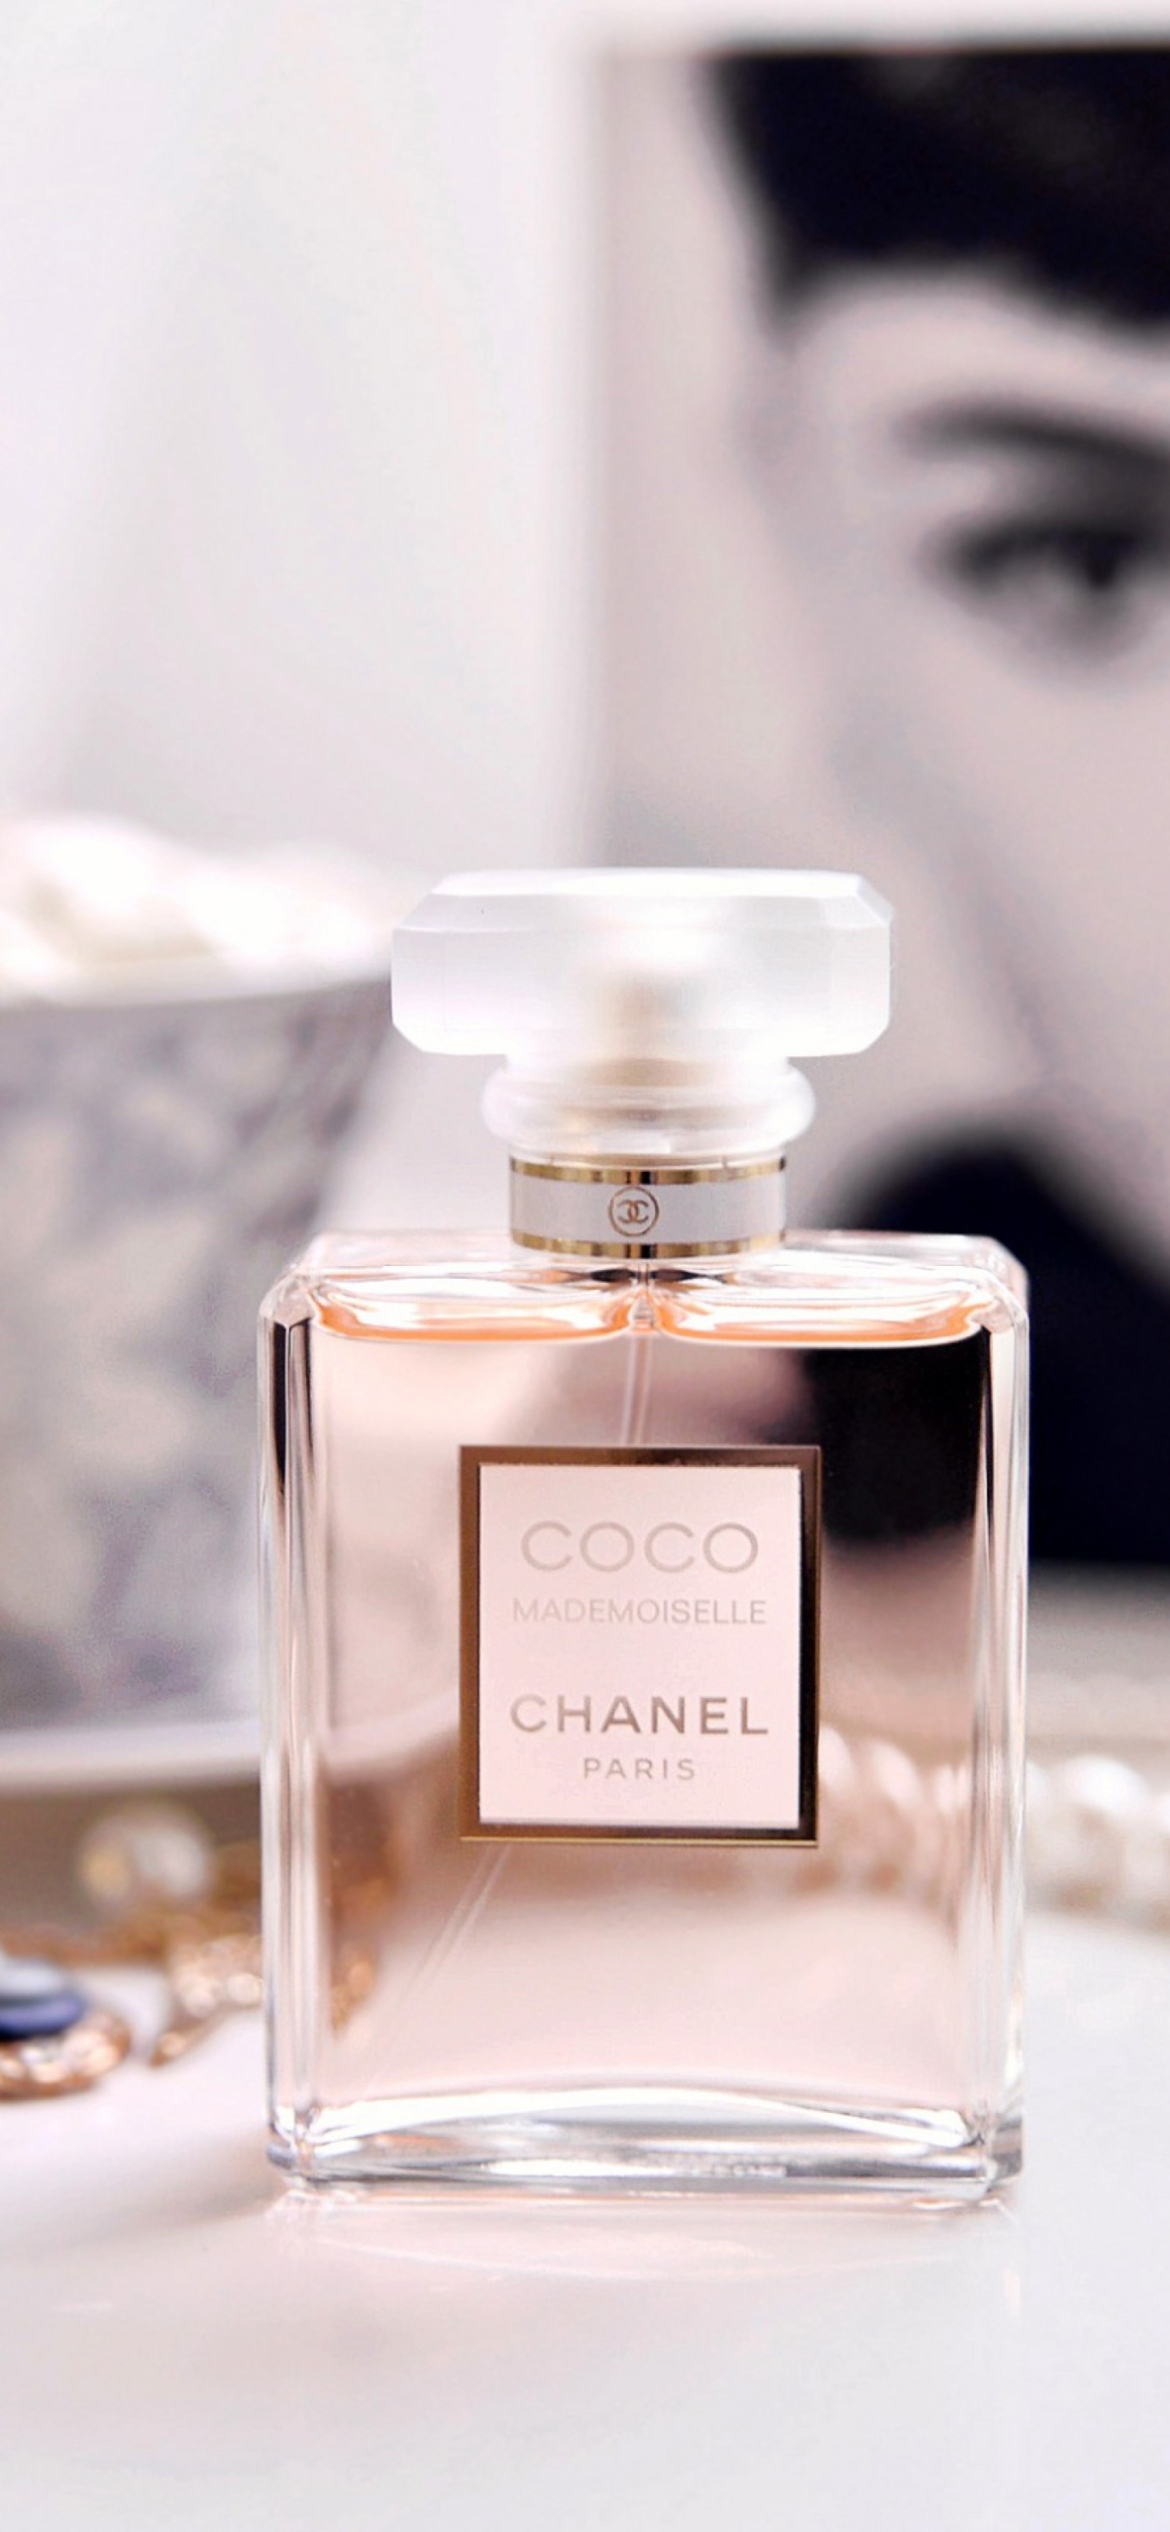 Chanel Coco Mademoiselle Perfume Wallpaper For Iphone 12 Pro